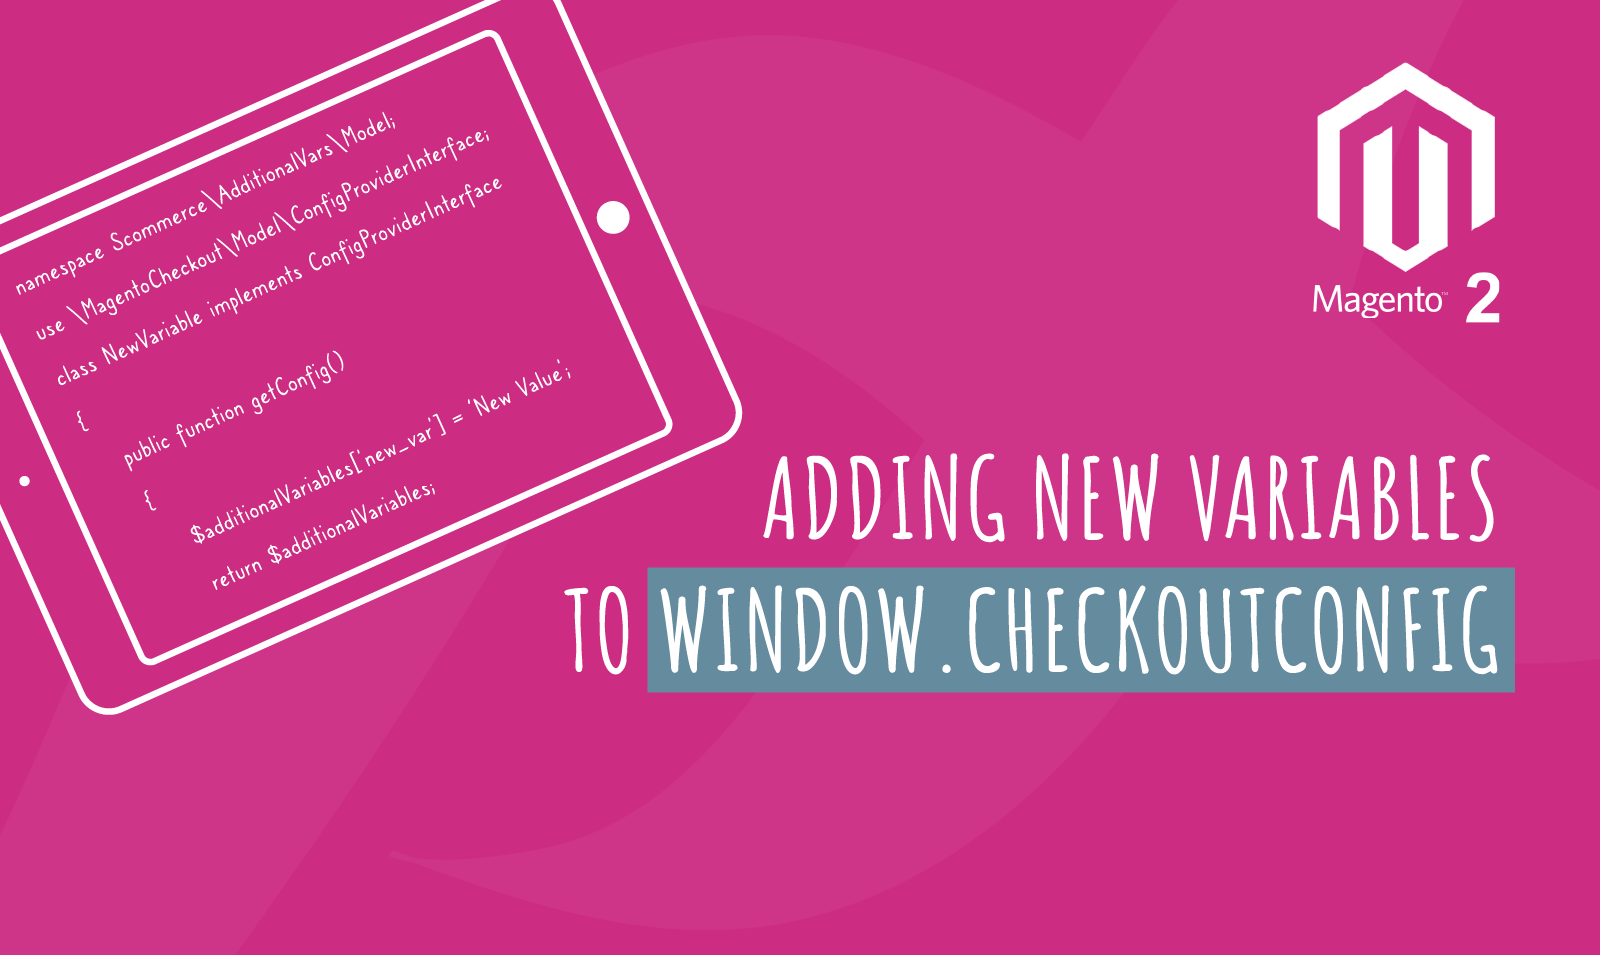 Adding New Variables to window.checkoutConfig on Magento 2 checkout